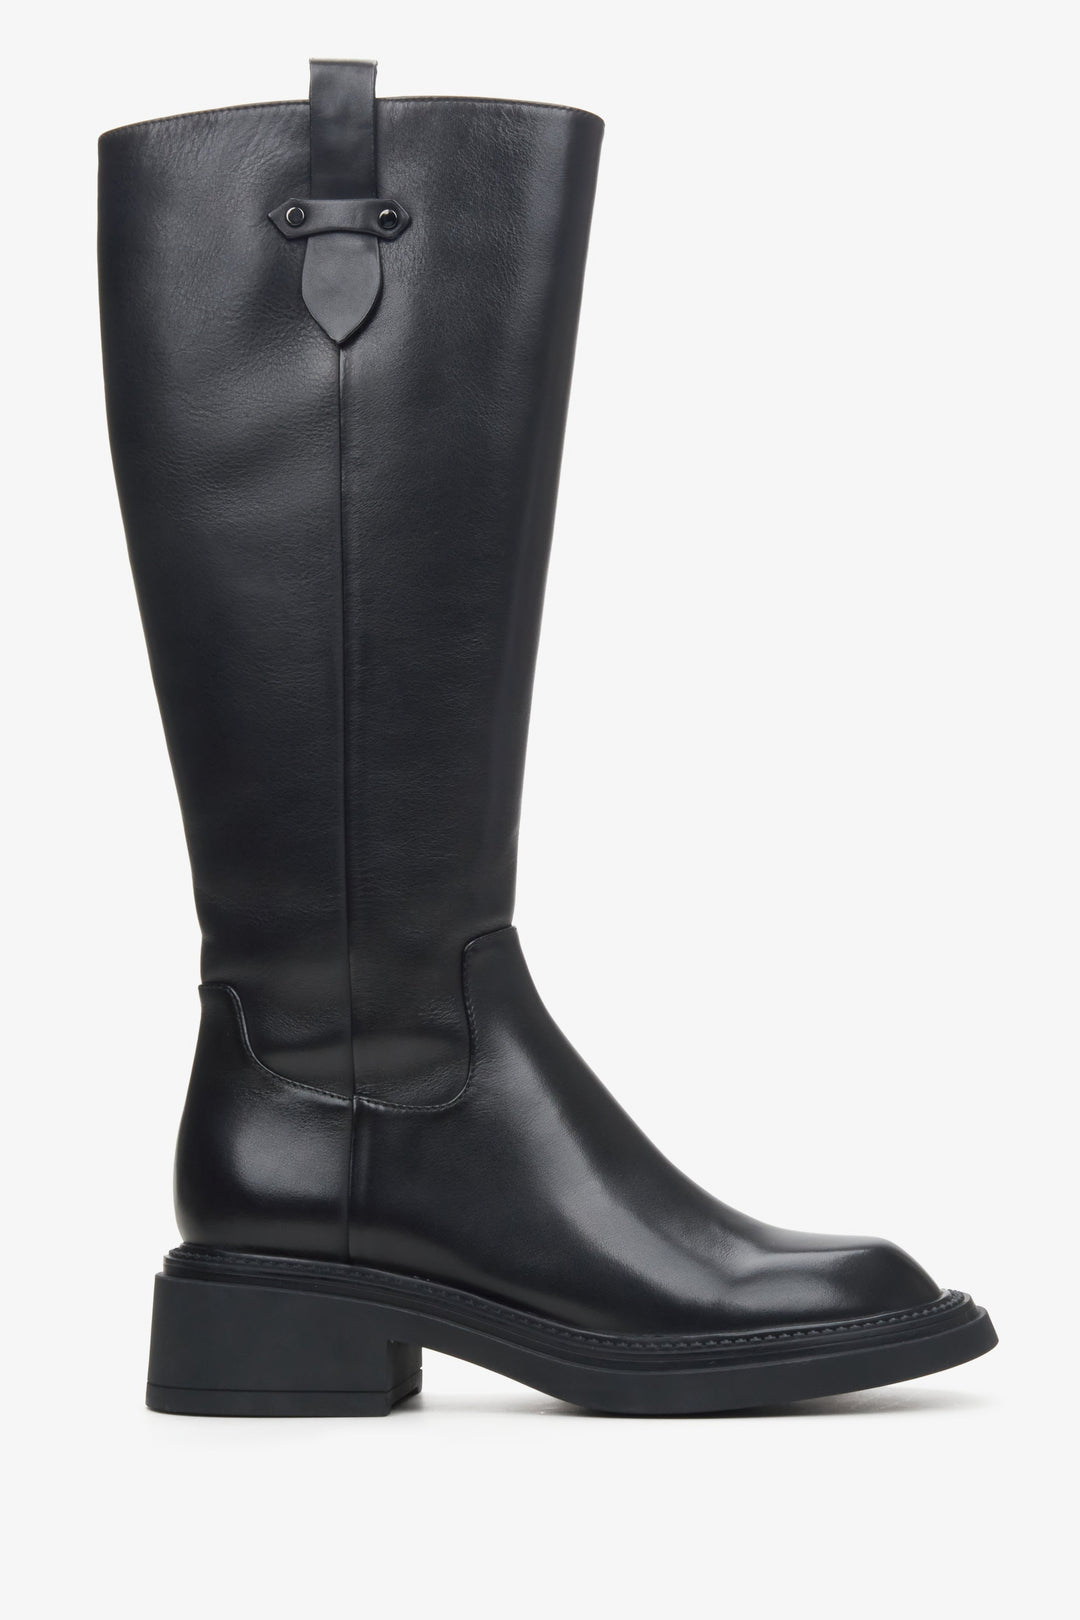 Women's Black Leather Boots with a Wide Shaft Estro ER00114317.